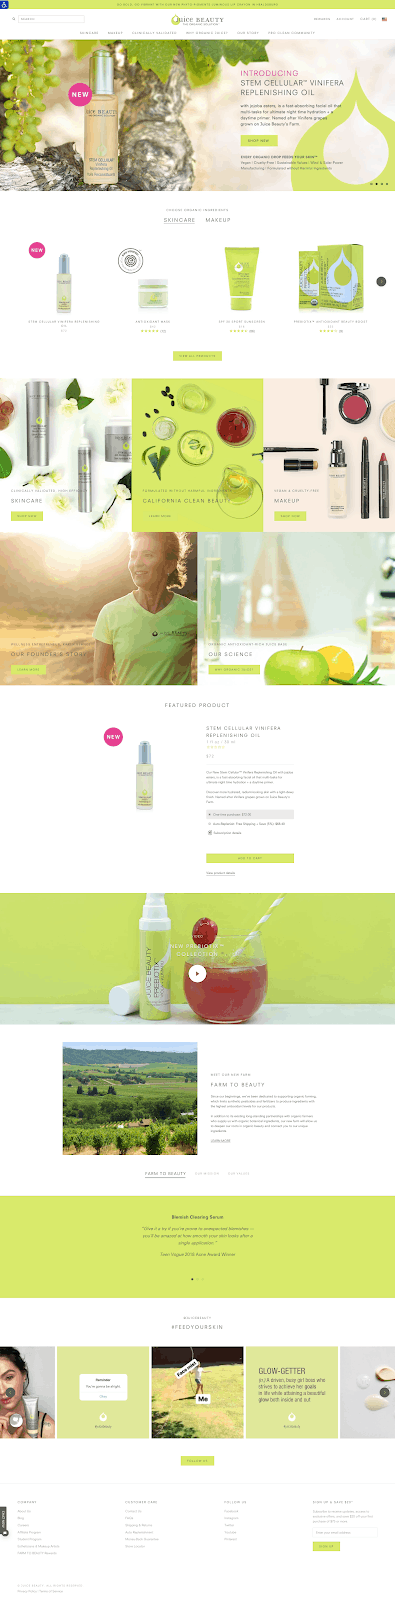 juice beauty's Homepage is Really Long